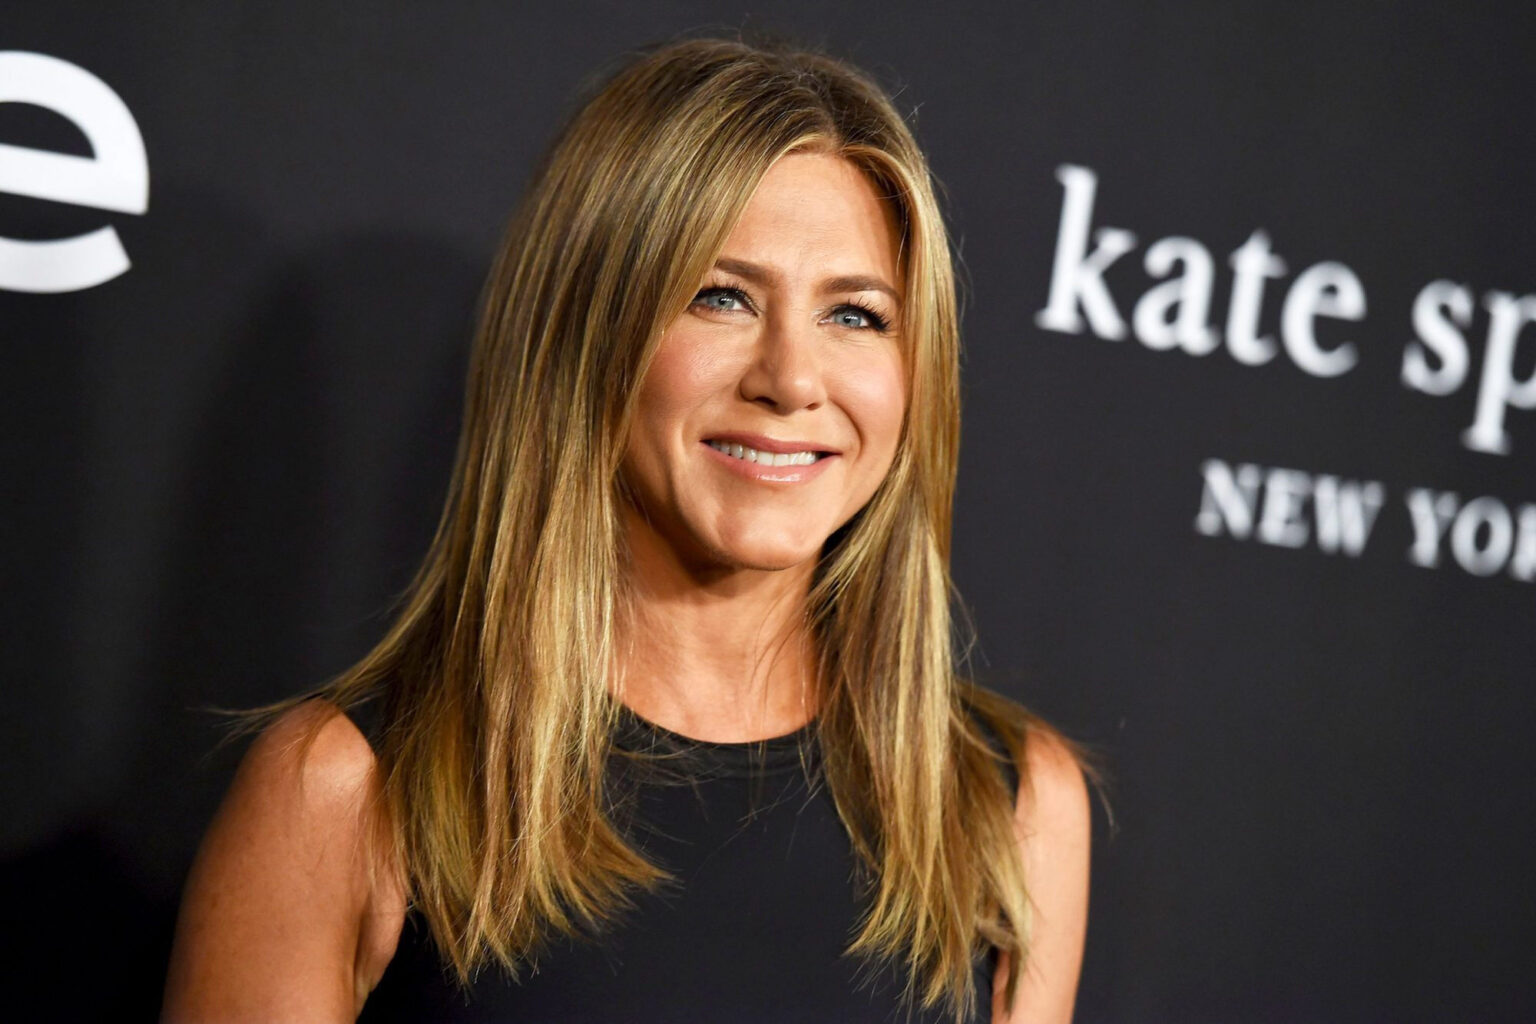 Do you think now is the time to adopt? Jennifer Aniston isn't a fan of those adoption rumors. Here's everything she has to say about the rumors.